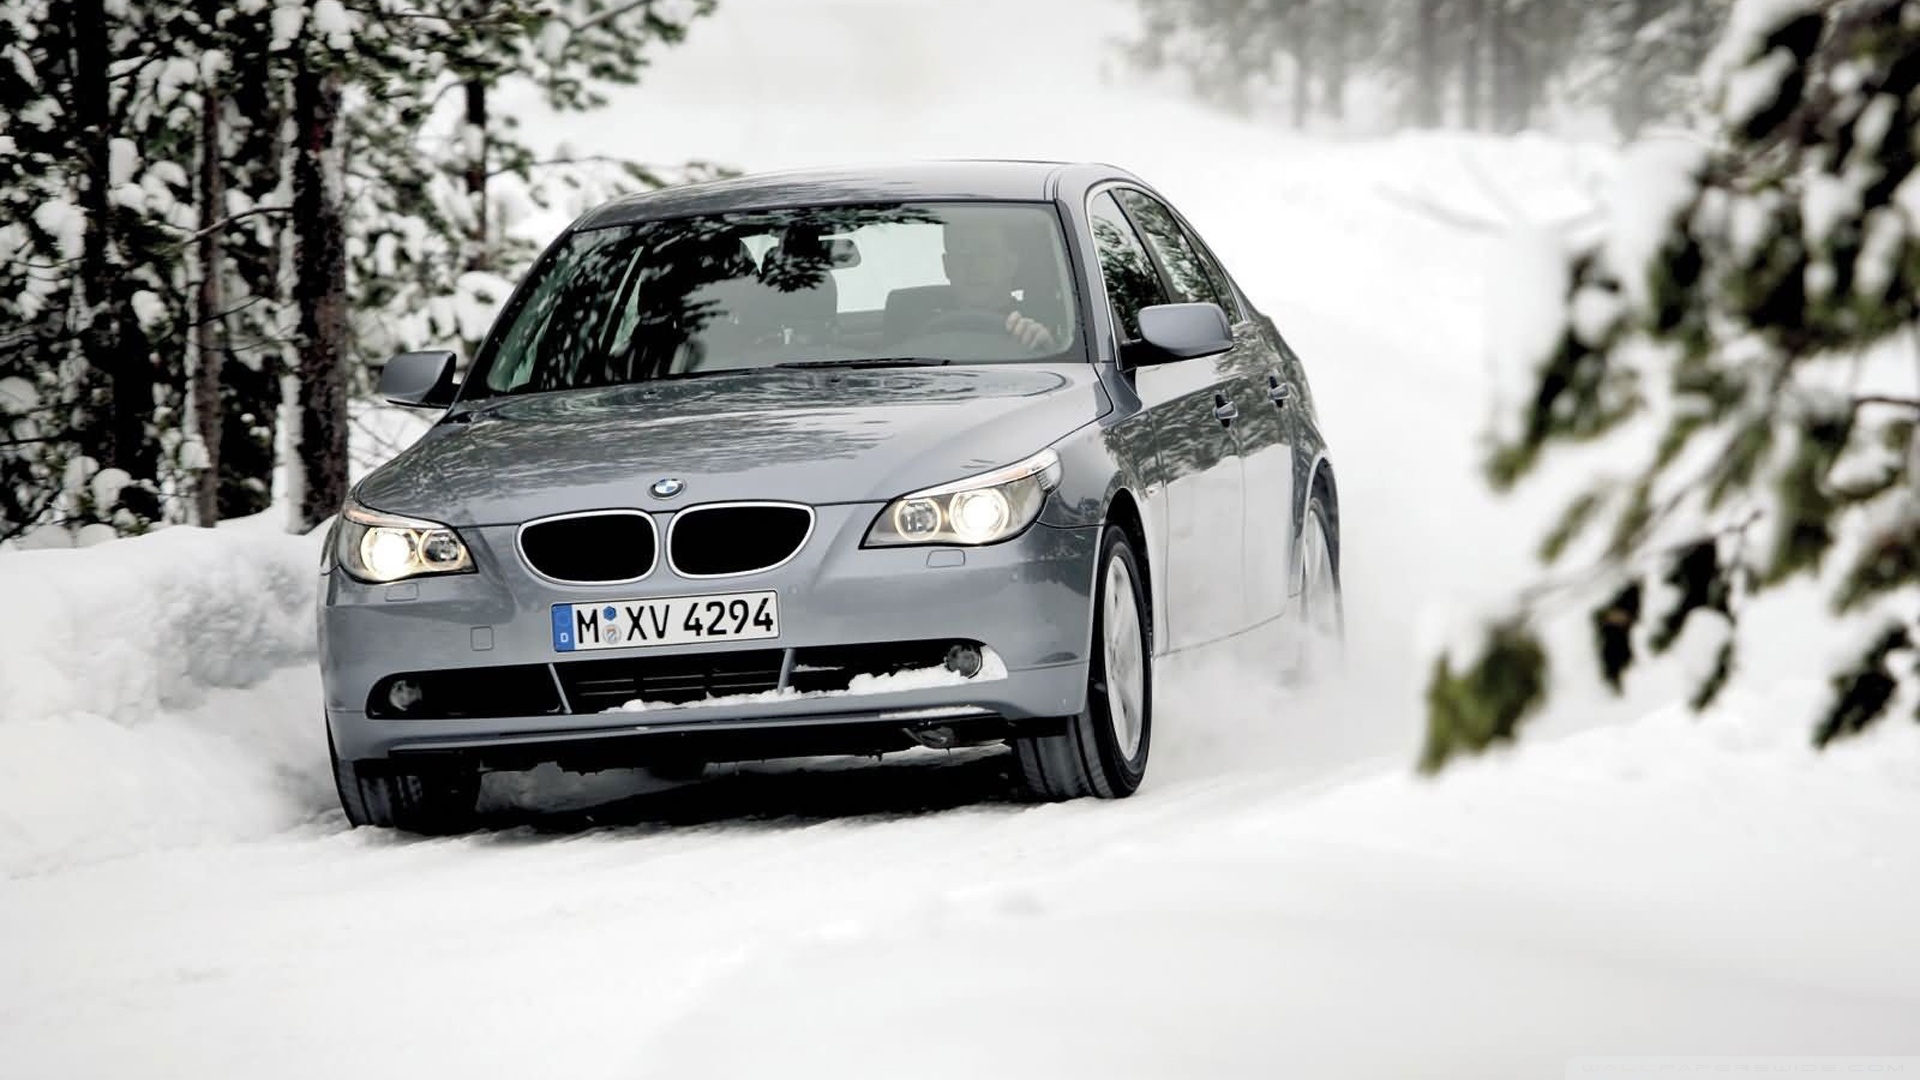 Bmw In The Snow Ultra HD Desktop Background Wallpaper For 4k UHD